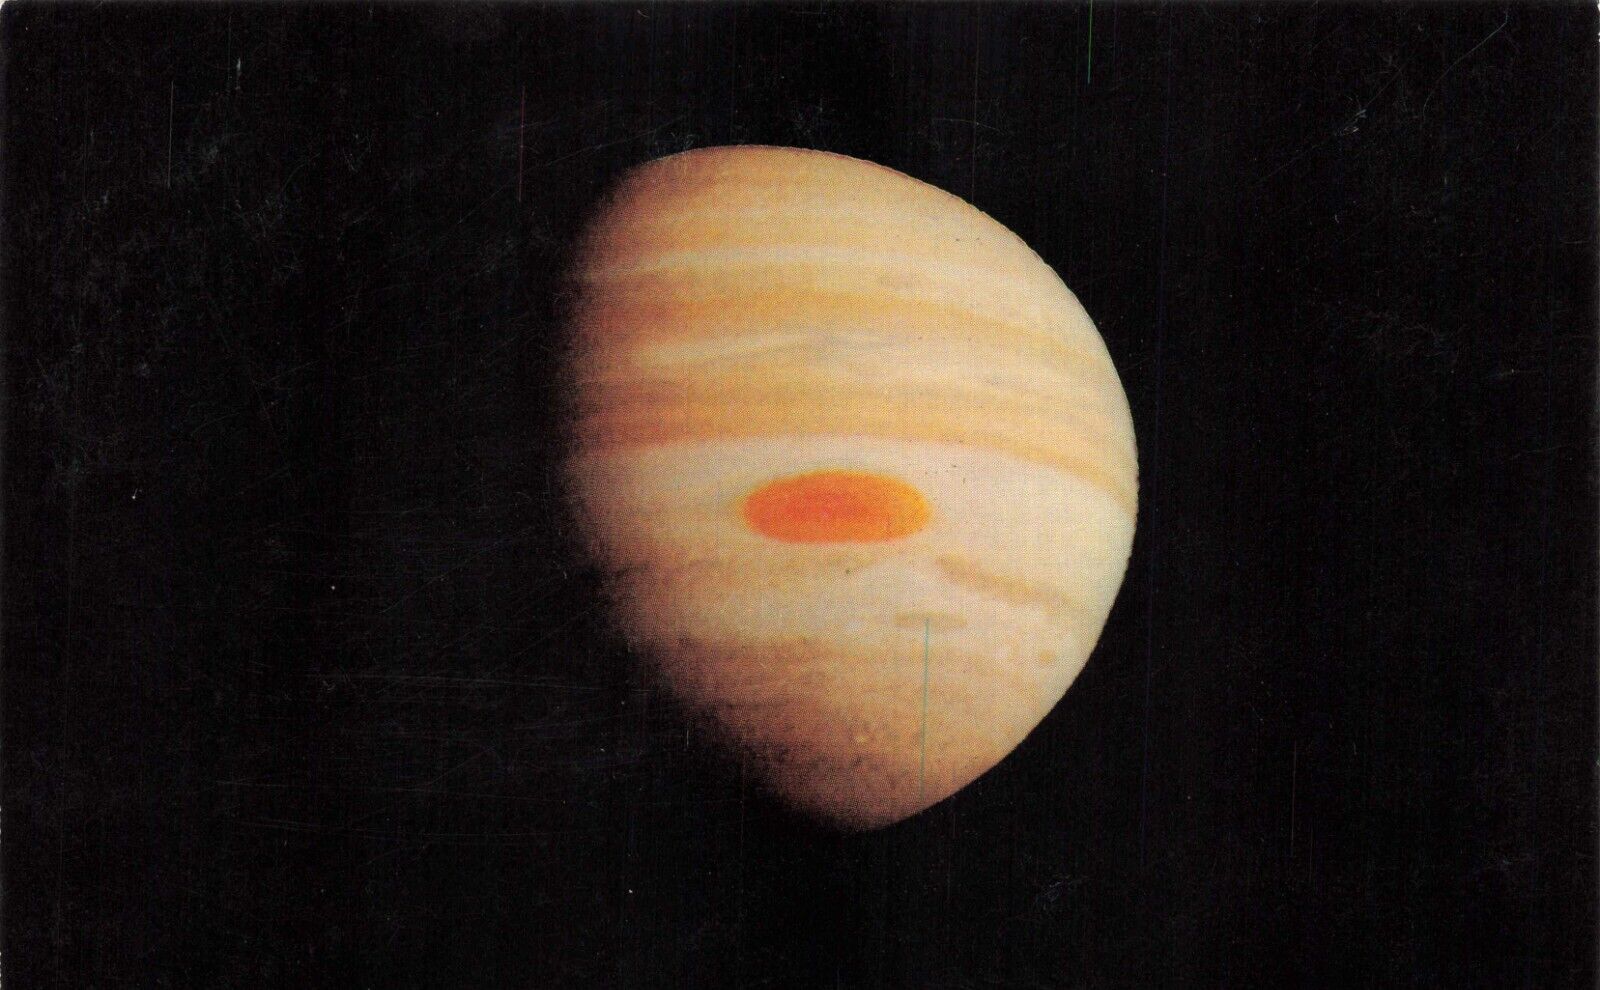 Postcard NASA Space Planet Jupiter Pioneer 11 Photo Solar System Giant Red Spot